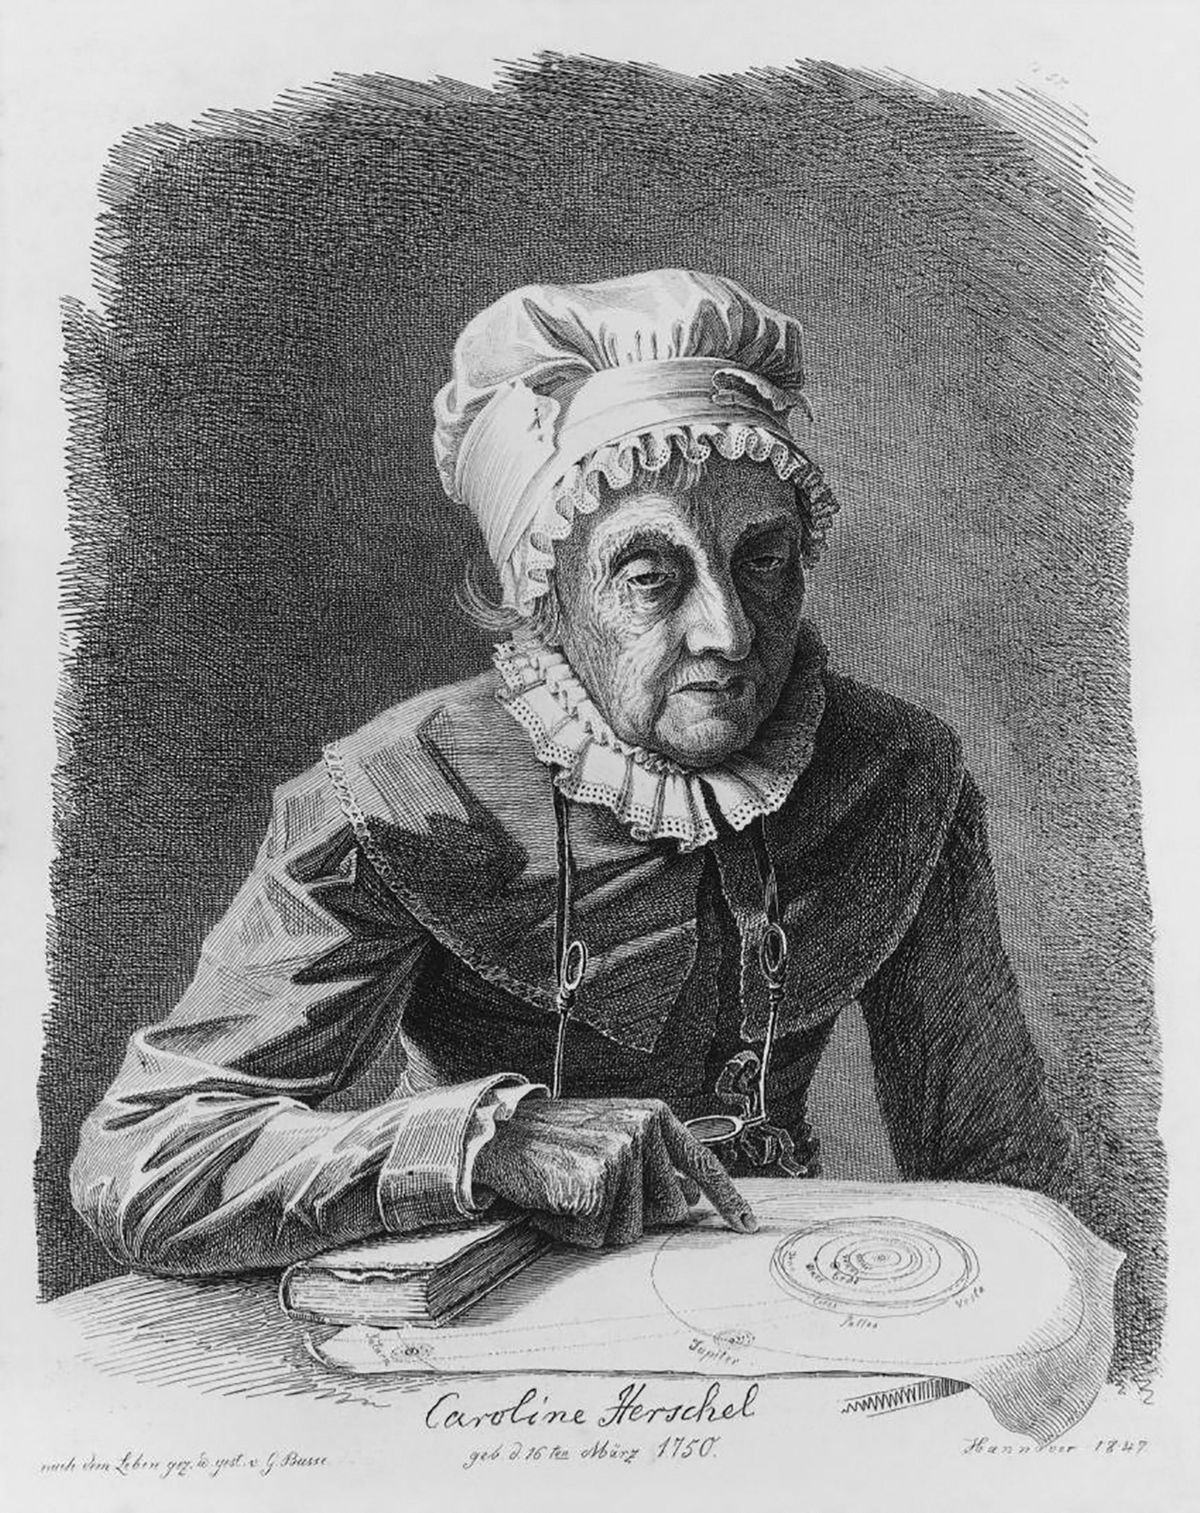 A late-life engraving of Caroline Herschel. Born to a family of musicians in Hanover, Germany, she moved to England in 1772 to assist her astronomer brother William Herschel. She lived a lonely existence under his control © Herschel Museum of Astronomy—Bath Preservation Trust